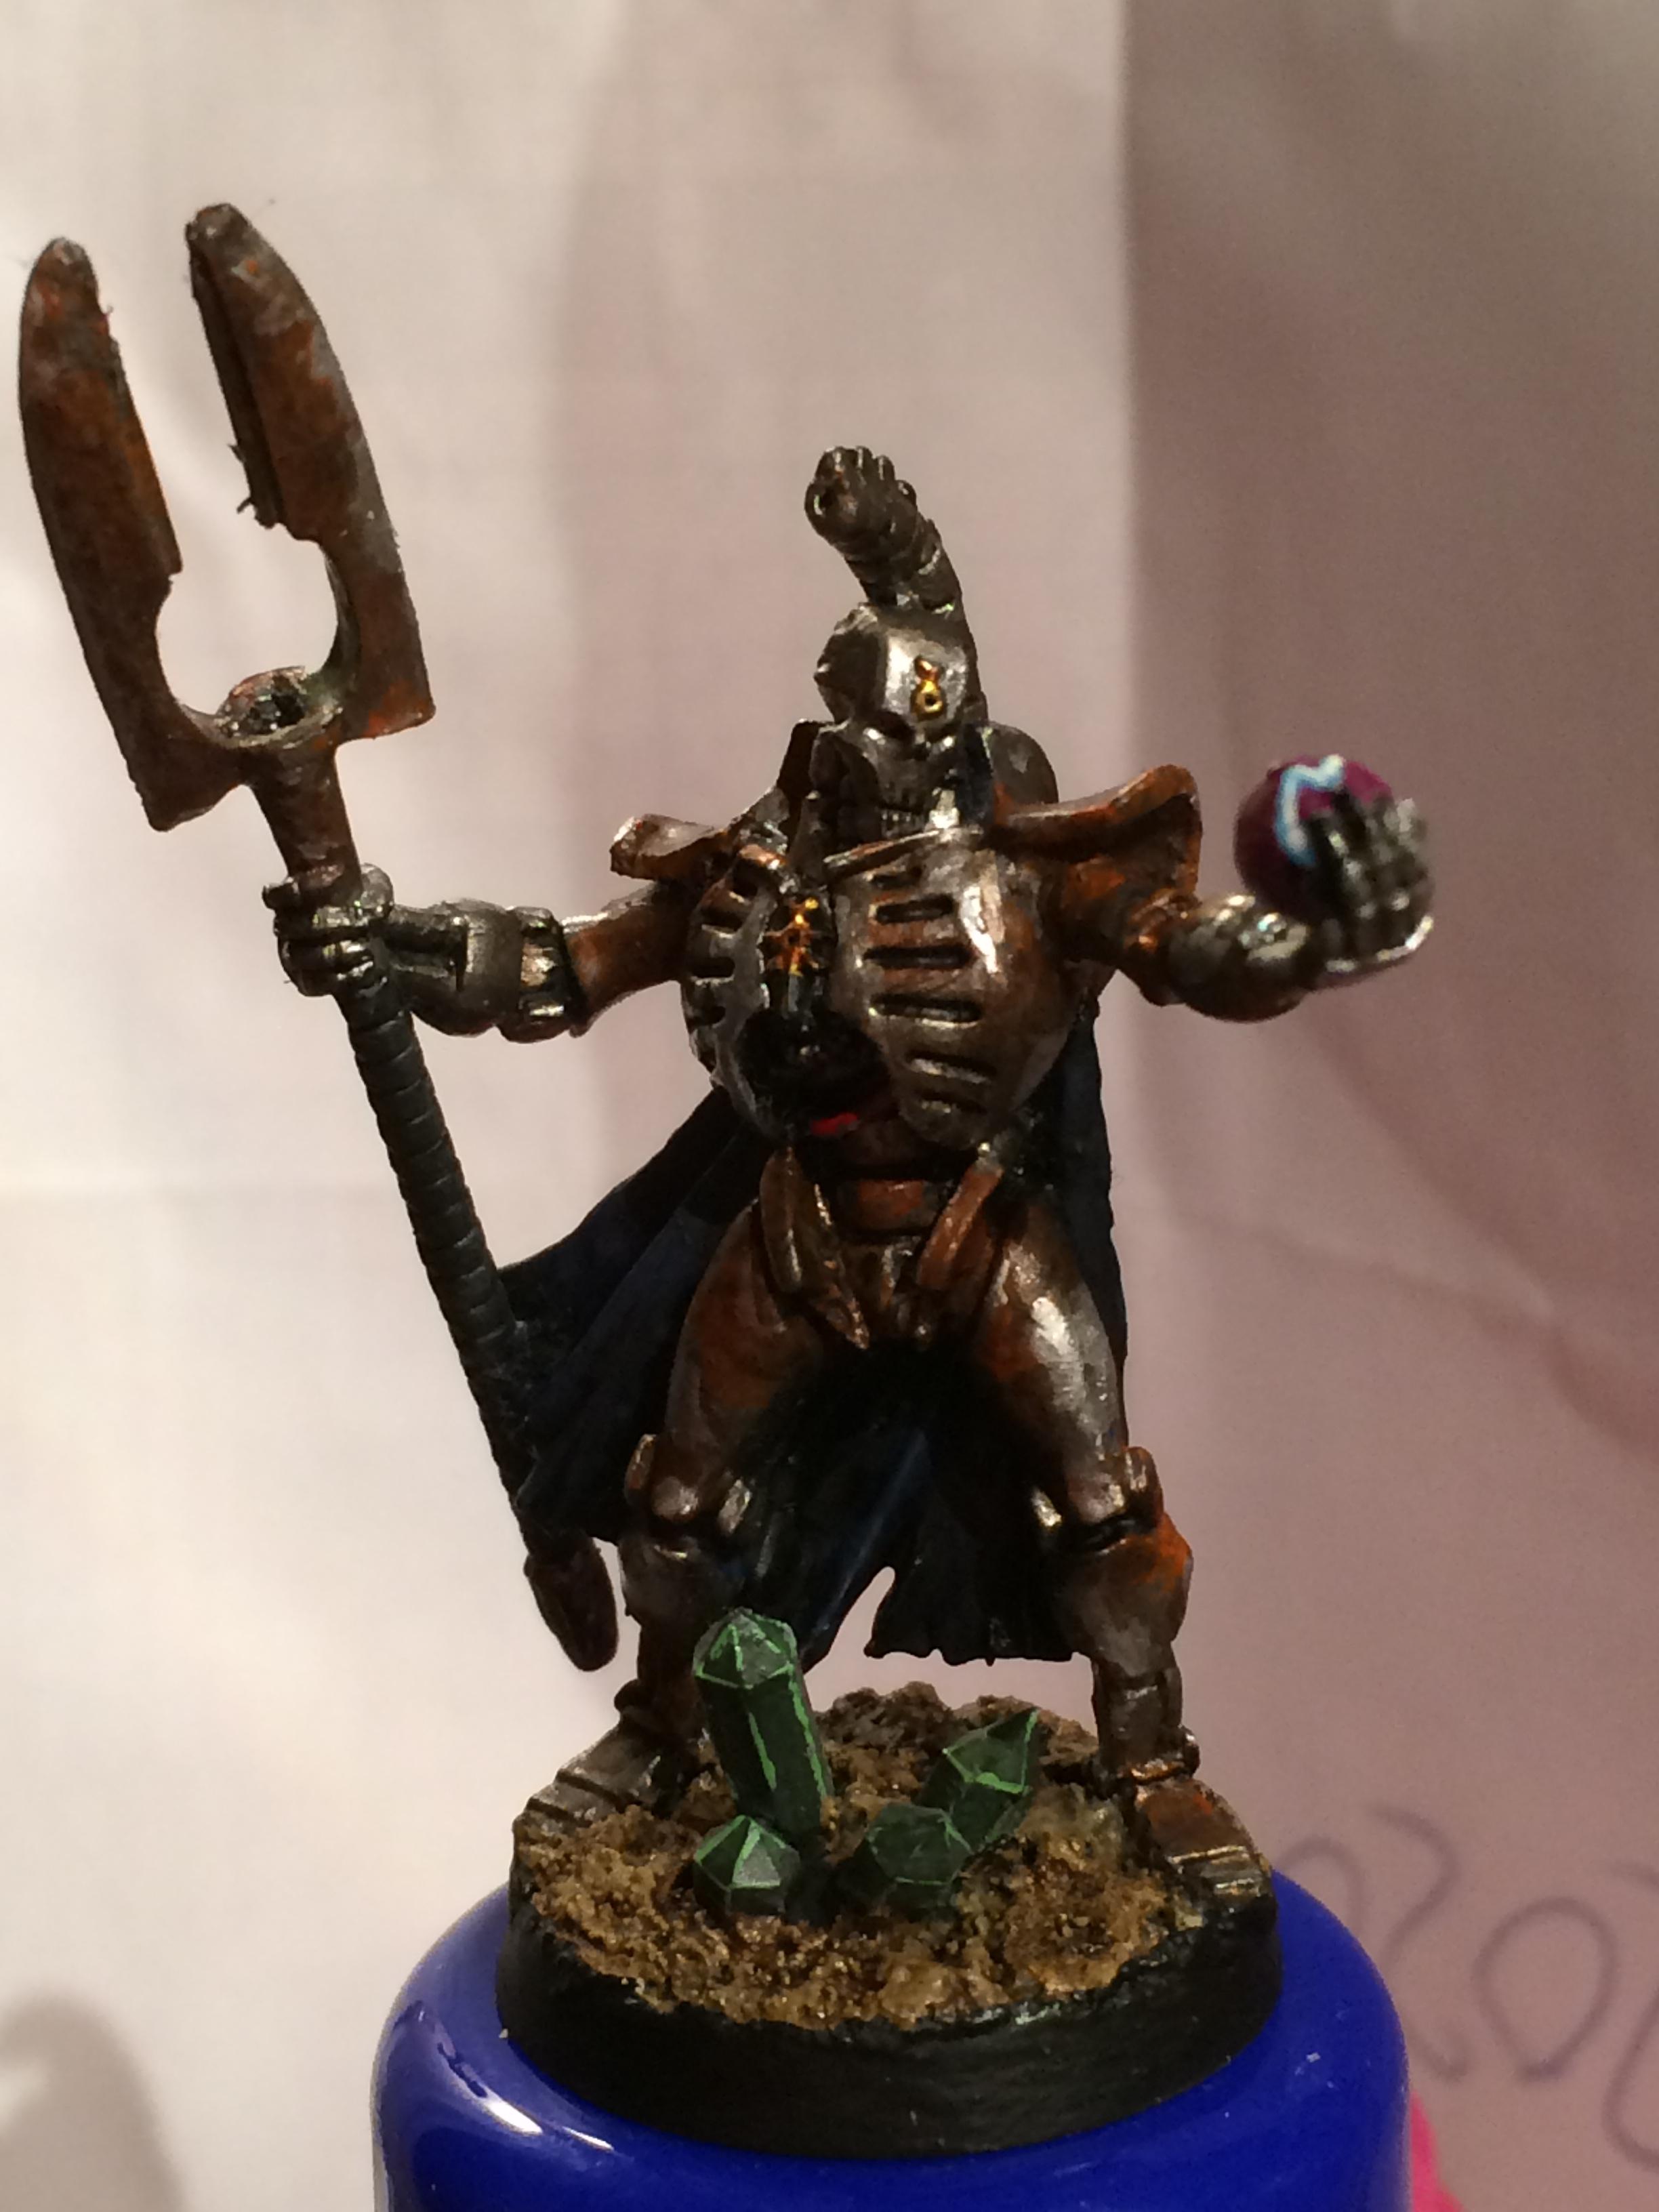 Conversion, Cool, Fast, Gaukler, Little Bit Wip, Lord, Metal, Metallic, Necrons, Old, Oldhammer, Painting, Quest, Rogue, School, Scratch Build, Simple, Skeletons, Star, Starquest, Style, Trader, Undead, Warriors